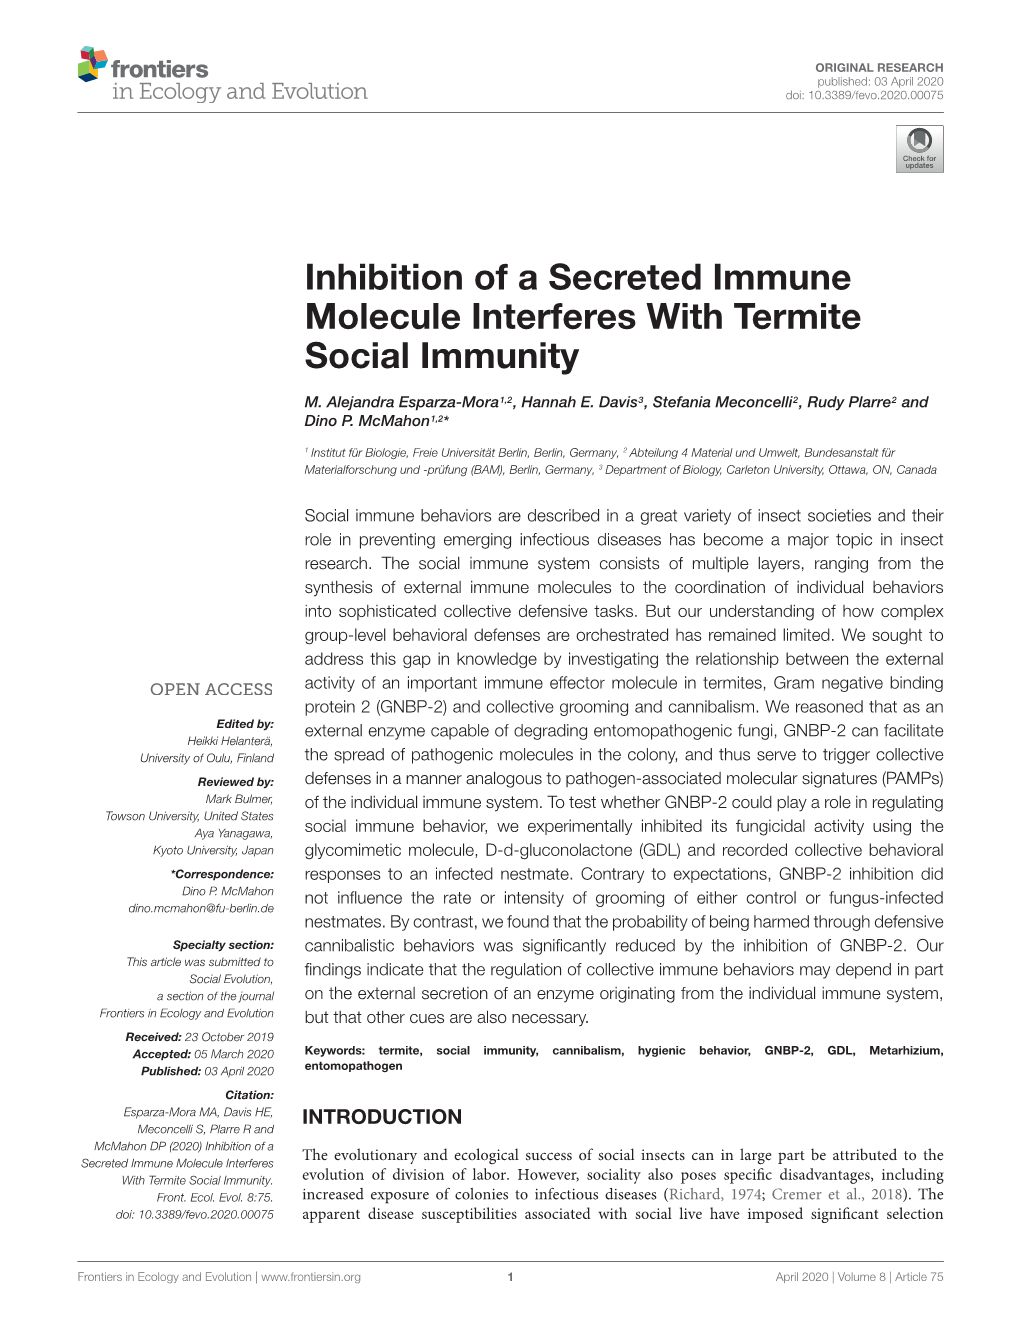 Inhibition of a Secreted Immune Molecule Interferes with Termite Social Immunity